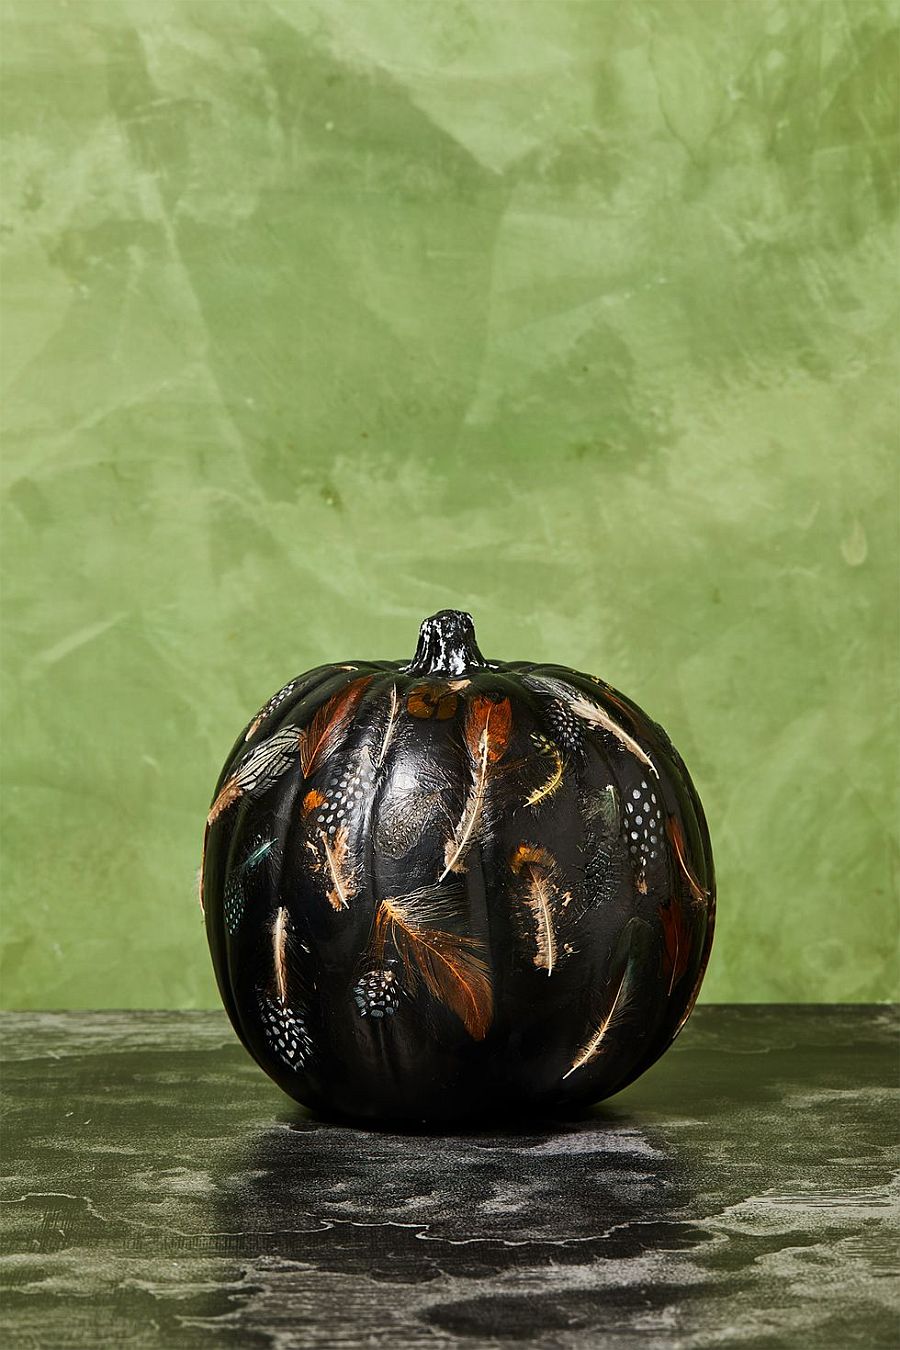 Feathered-pattern-on-the-pumpkin-turns-it-into-an-absolute-showstopper-29126